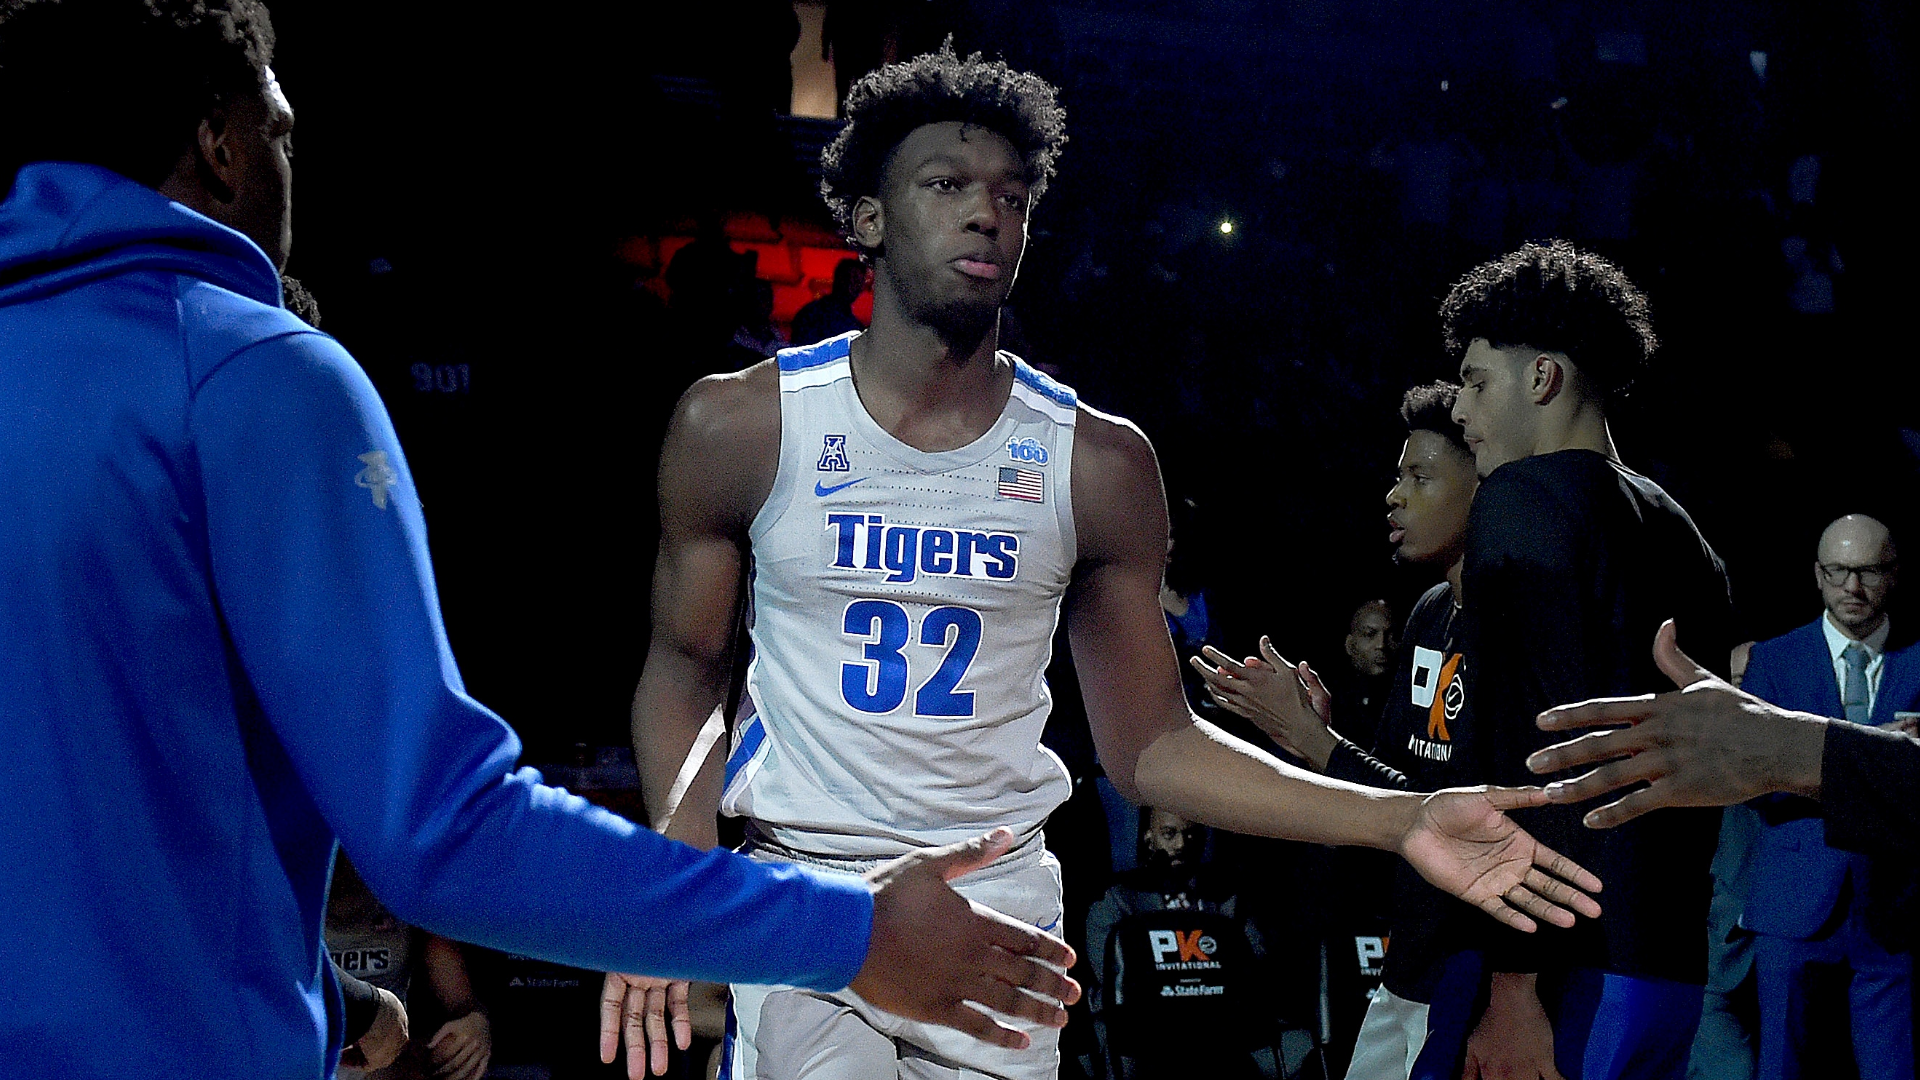 NBA Draft 2020: James Wiseman scouting report, strengths, weaknesses and player comparison. NBA.com Australia. The official site of